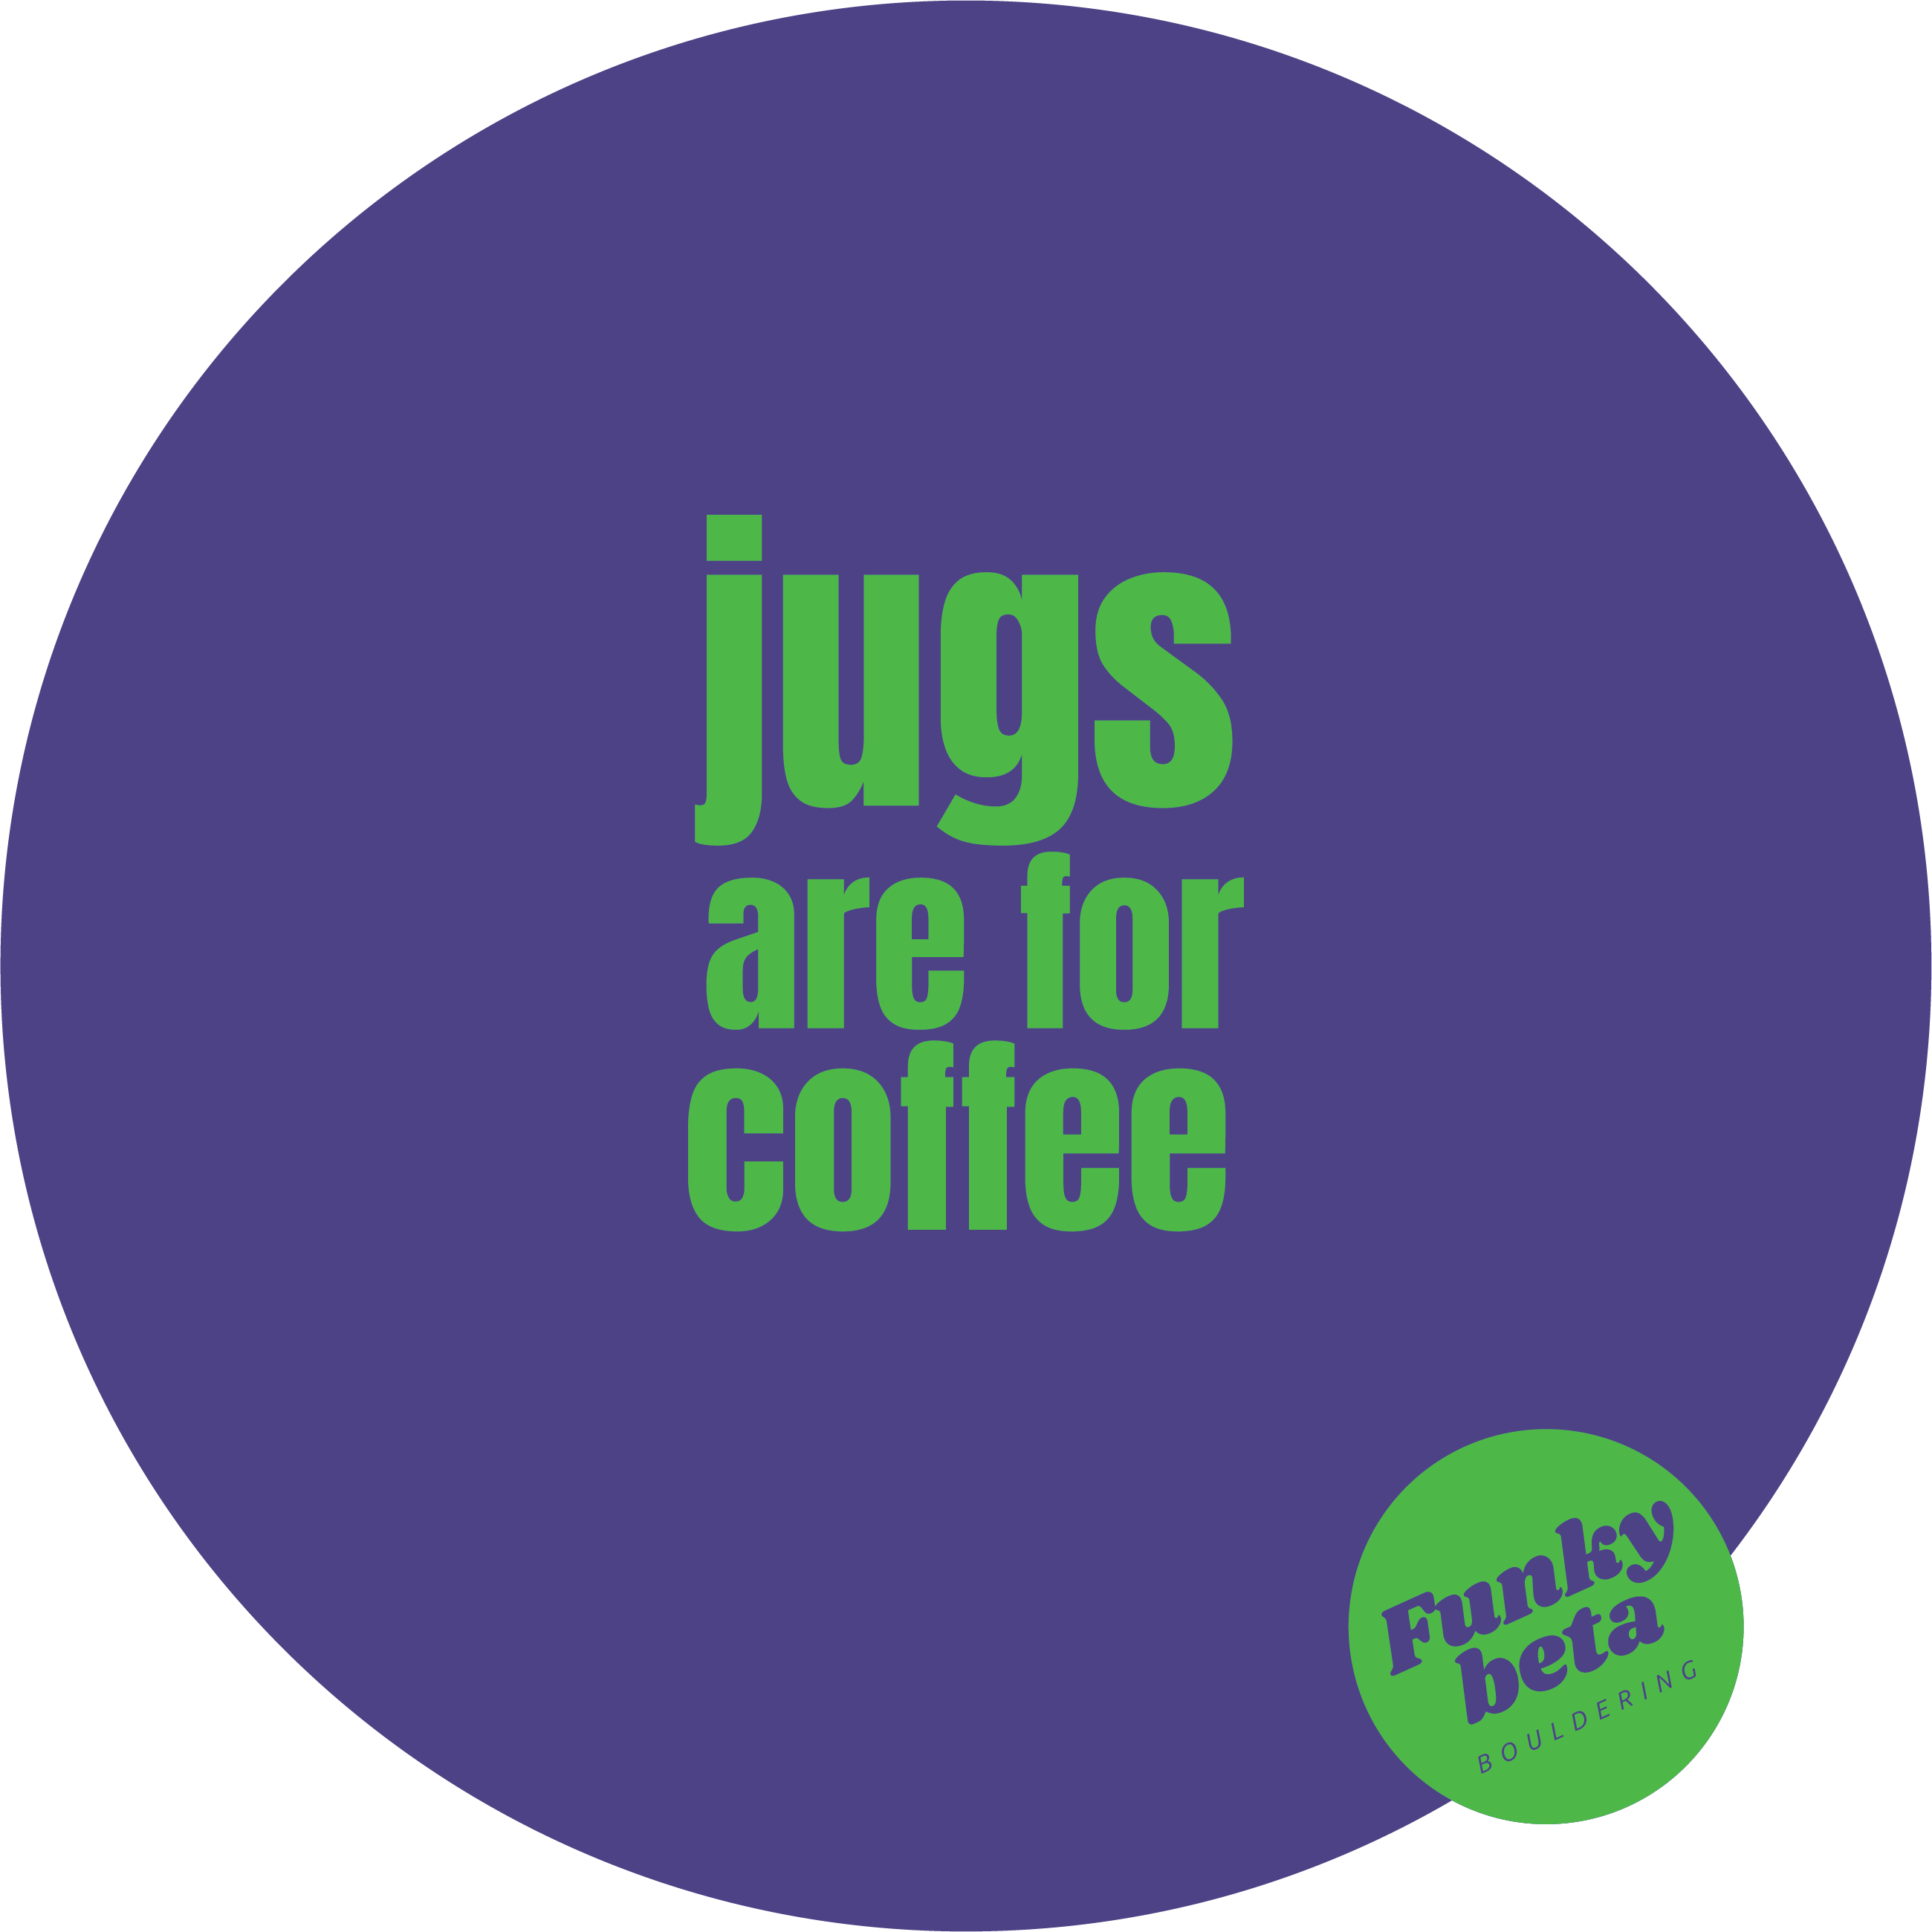 Jugs are for coffee - with square - for her - on stock